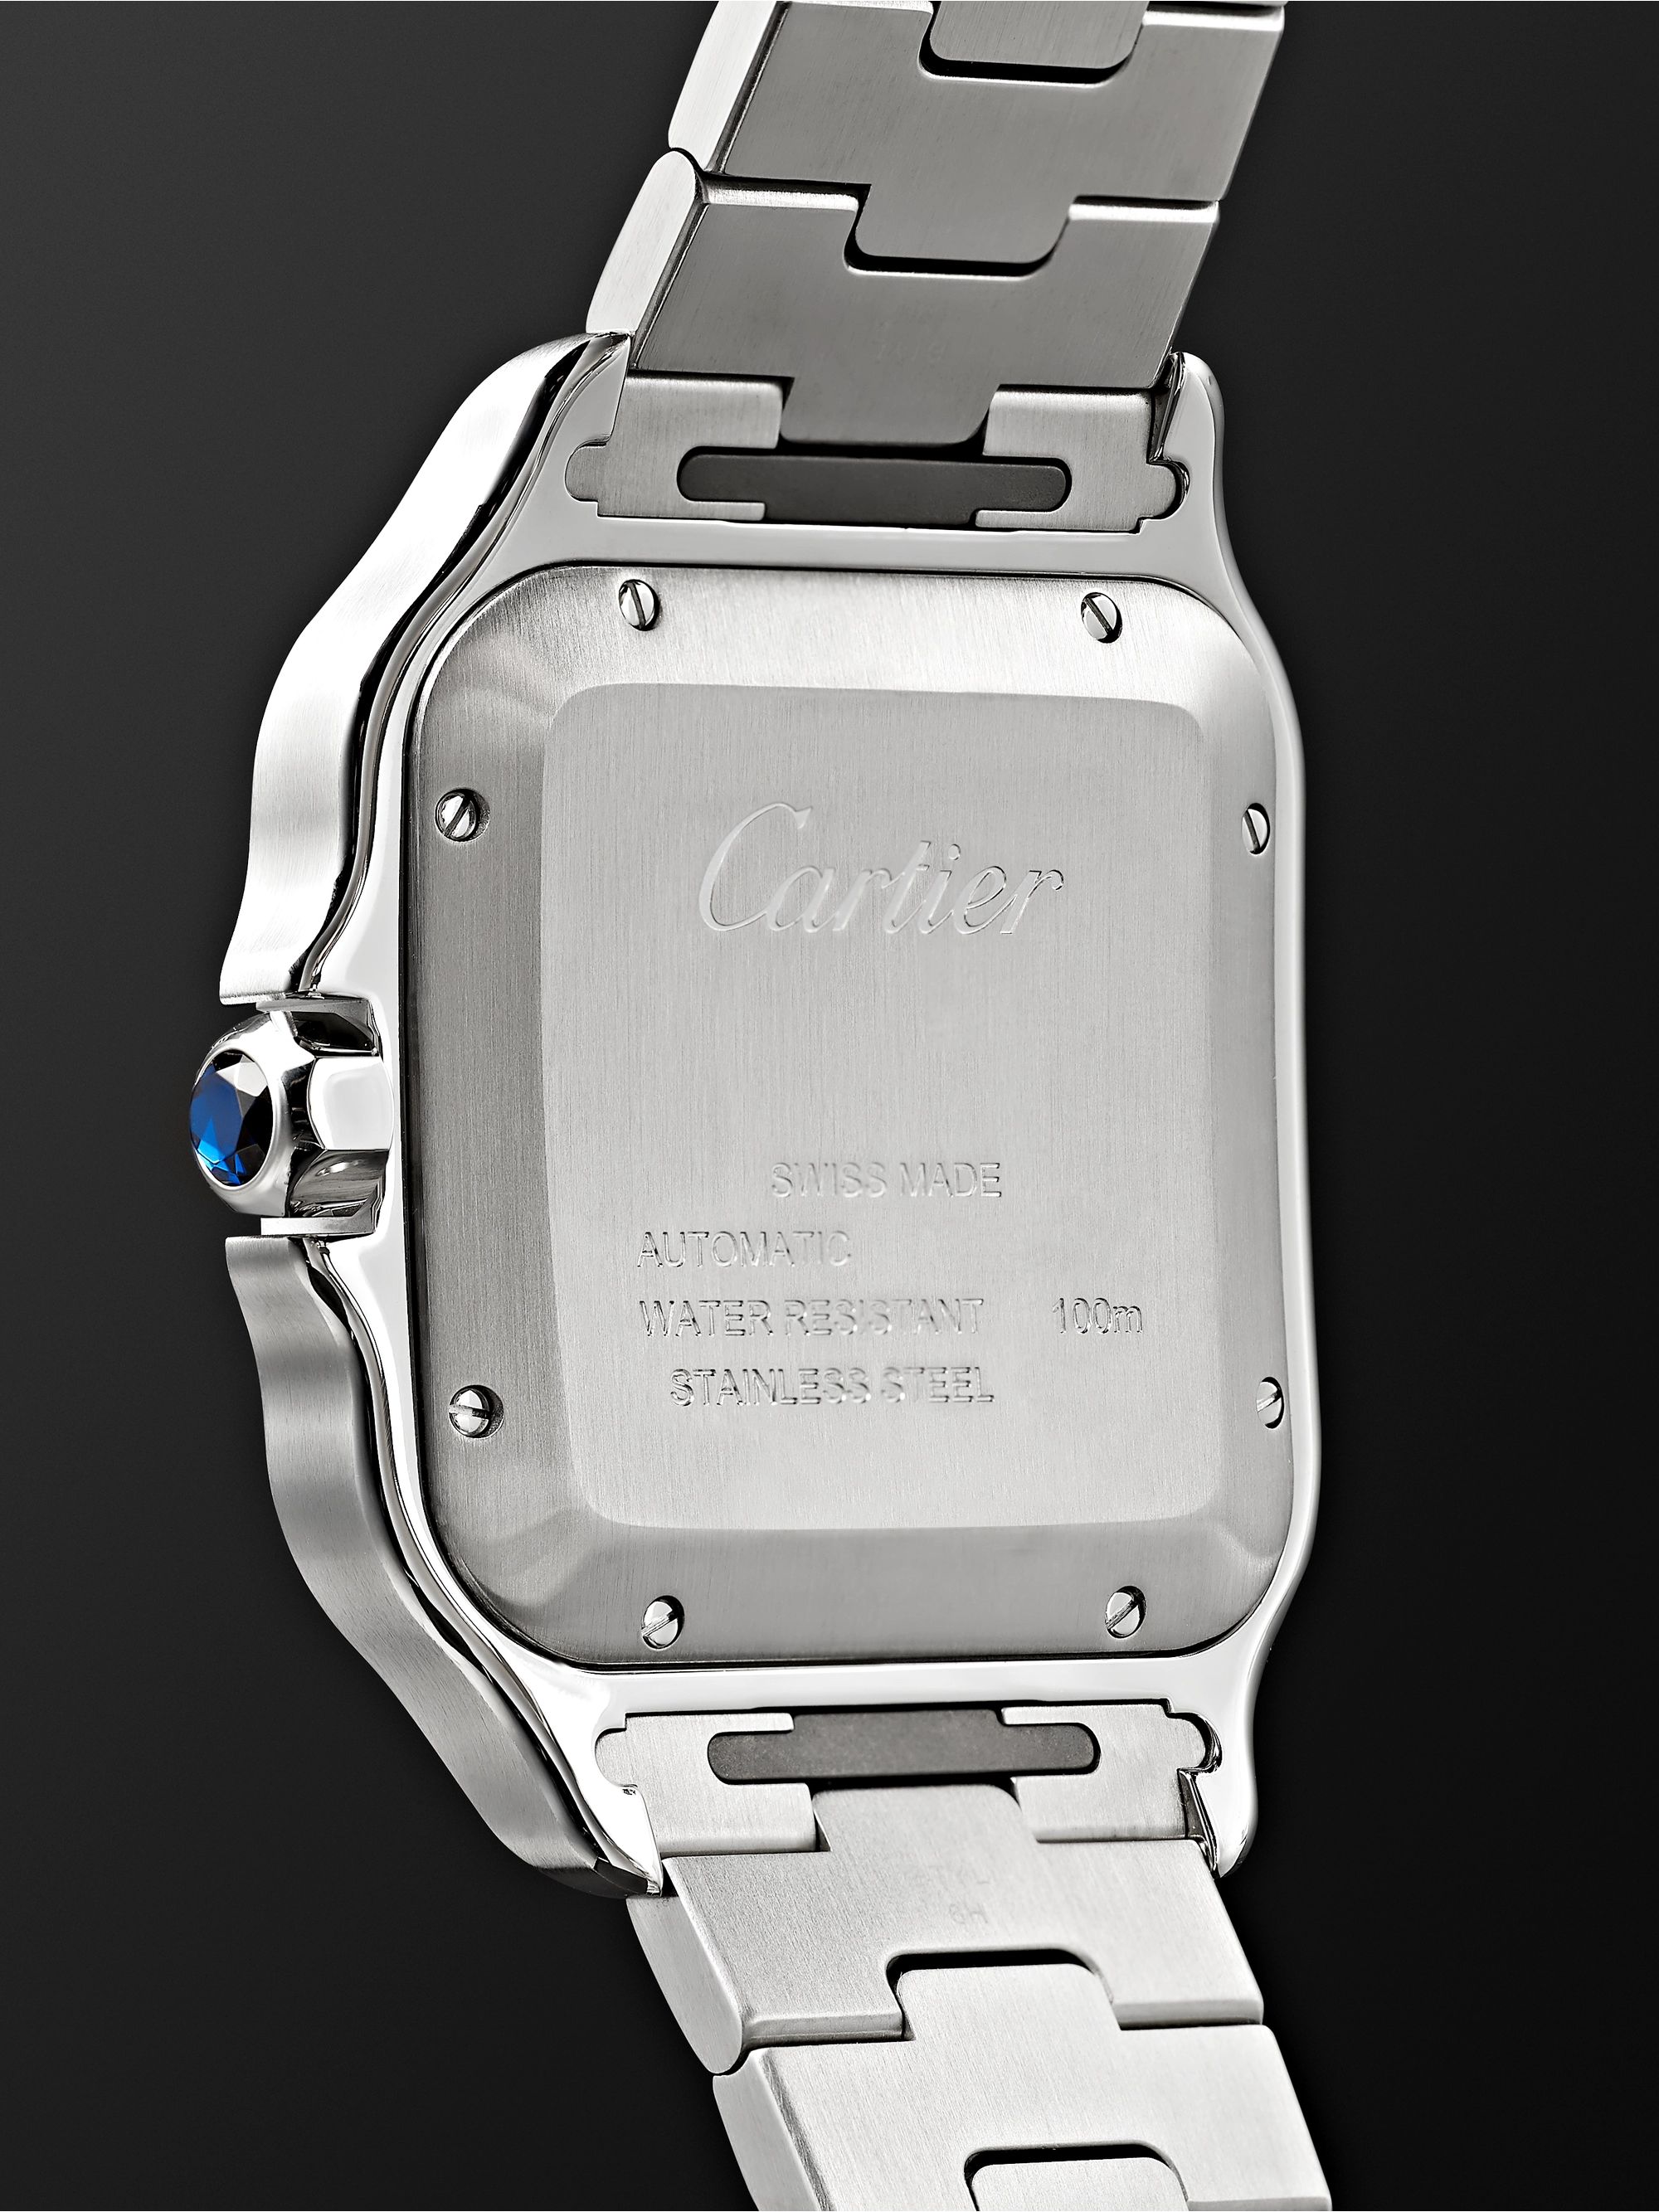 CARTIER Santos de Cartier Automatic 39.8mm Interchangeable Stainless Steel and Leather Watch, Ref. No. WSSA0013